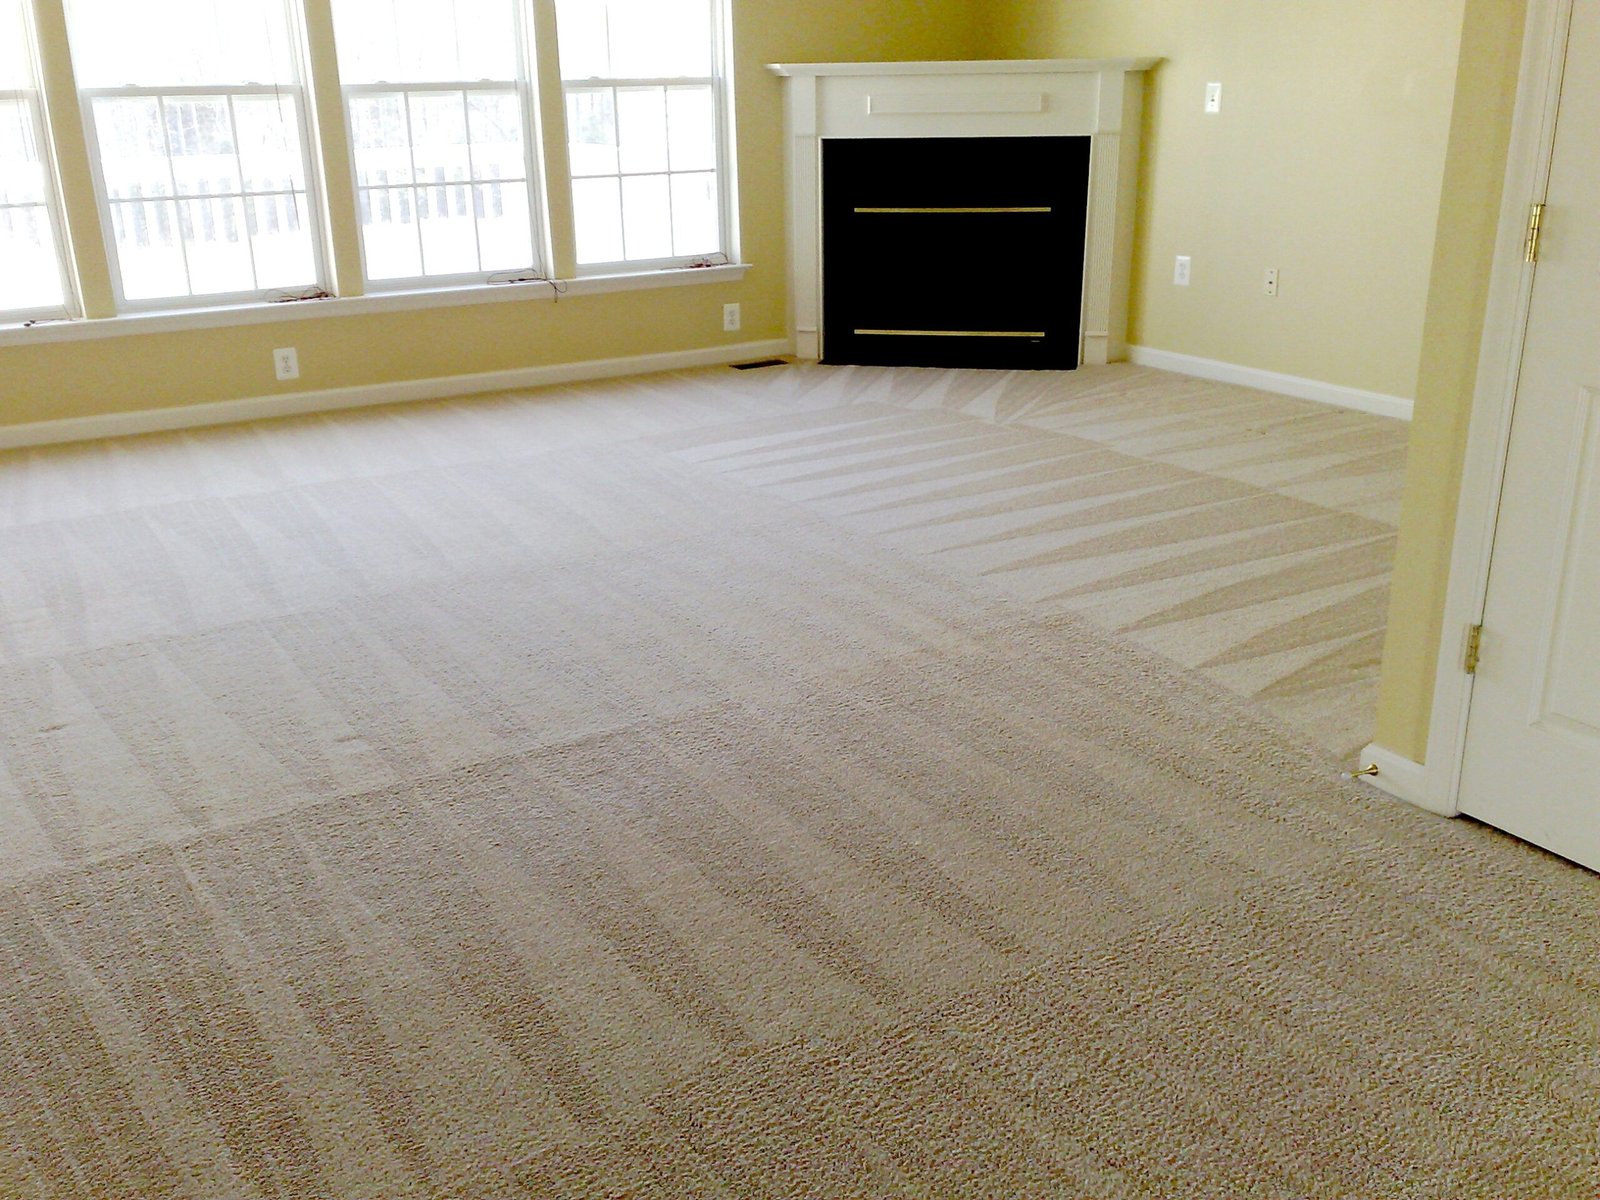 Proficient Carpet Cleaning versus Do-It-Yourself Carpet Cleaning